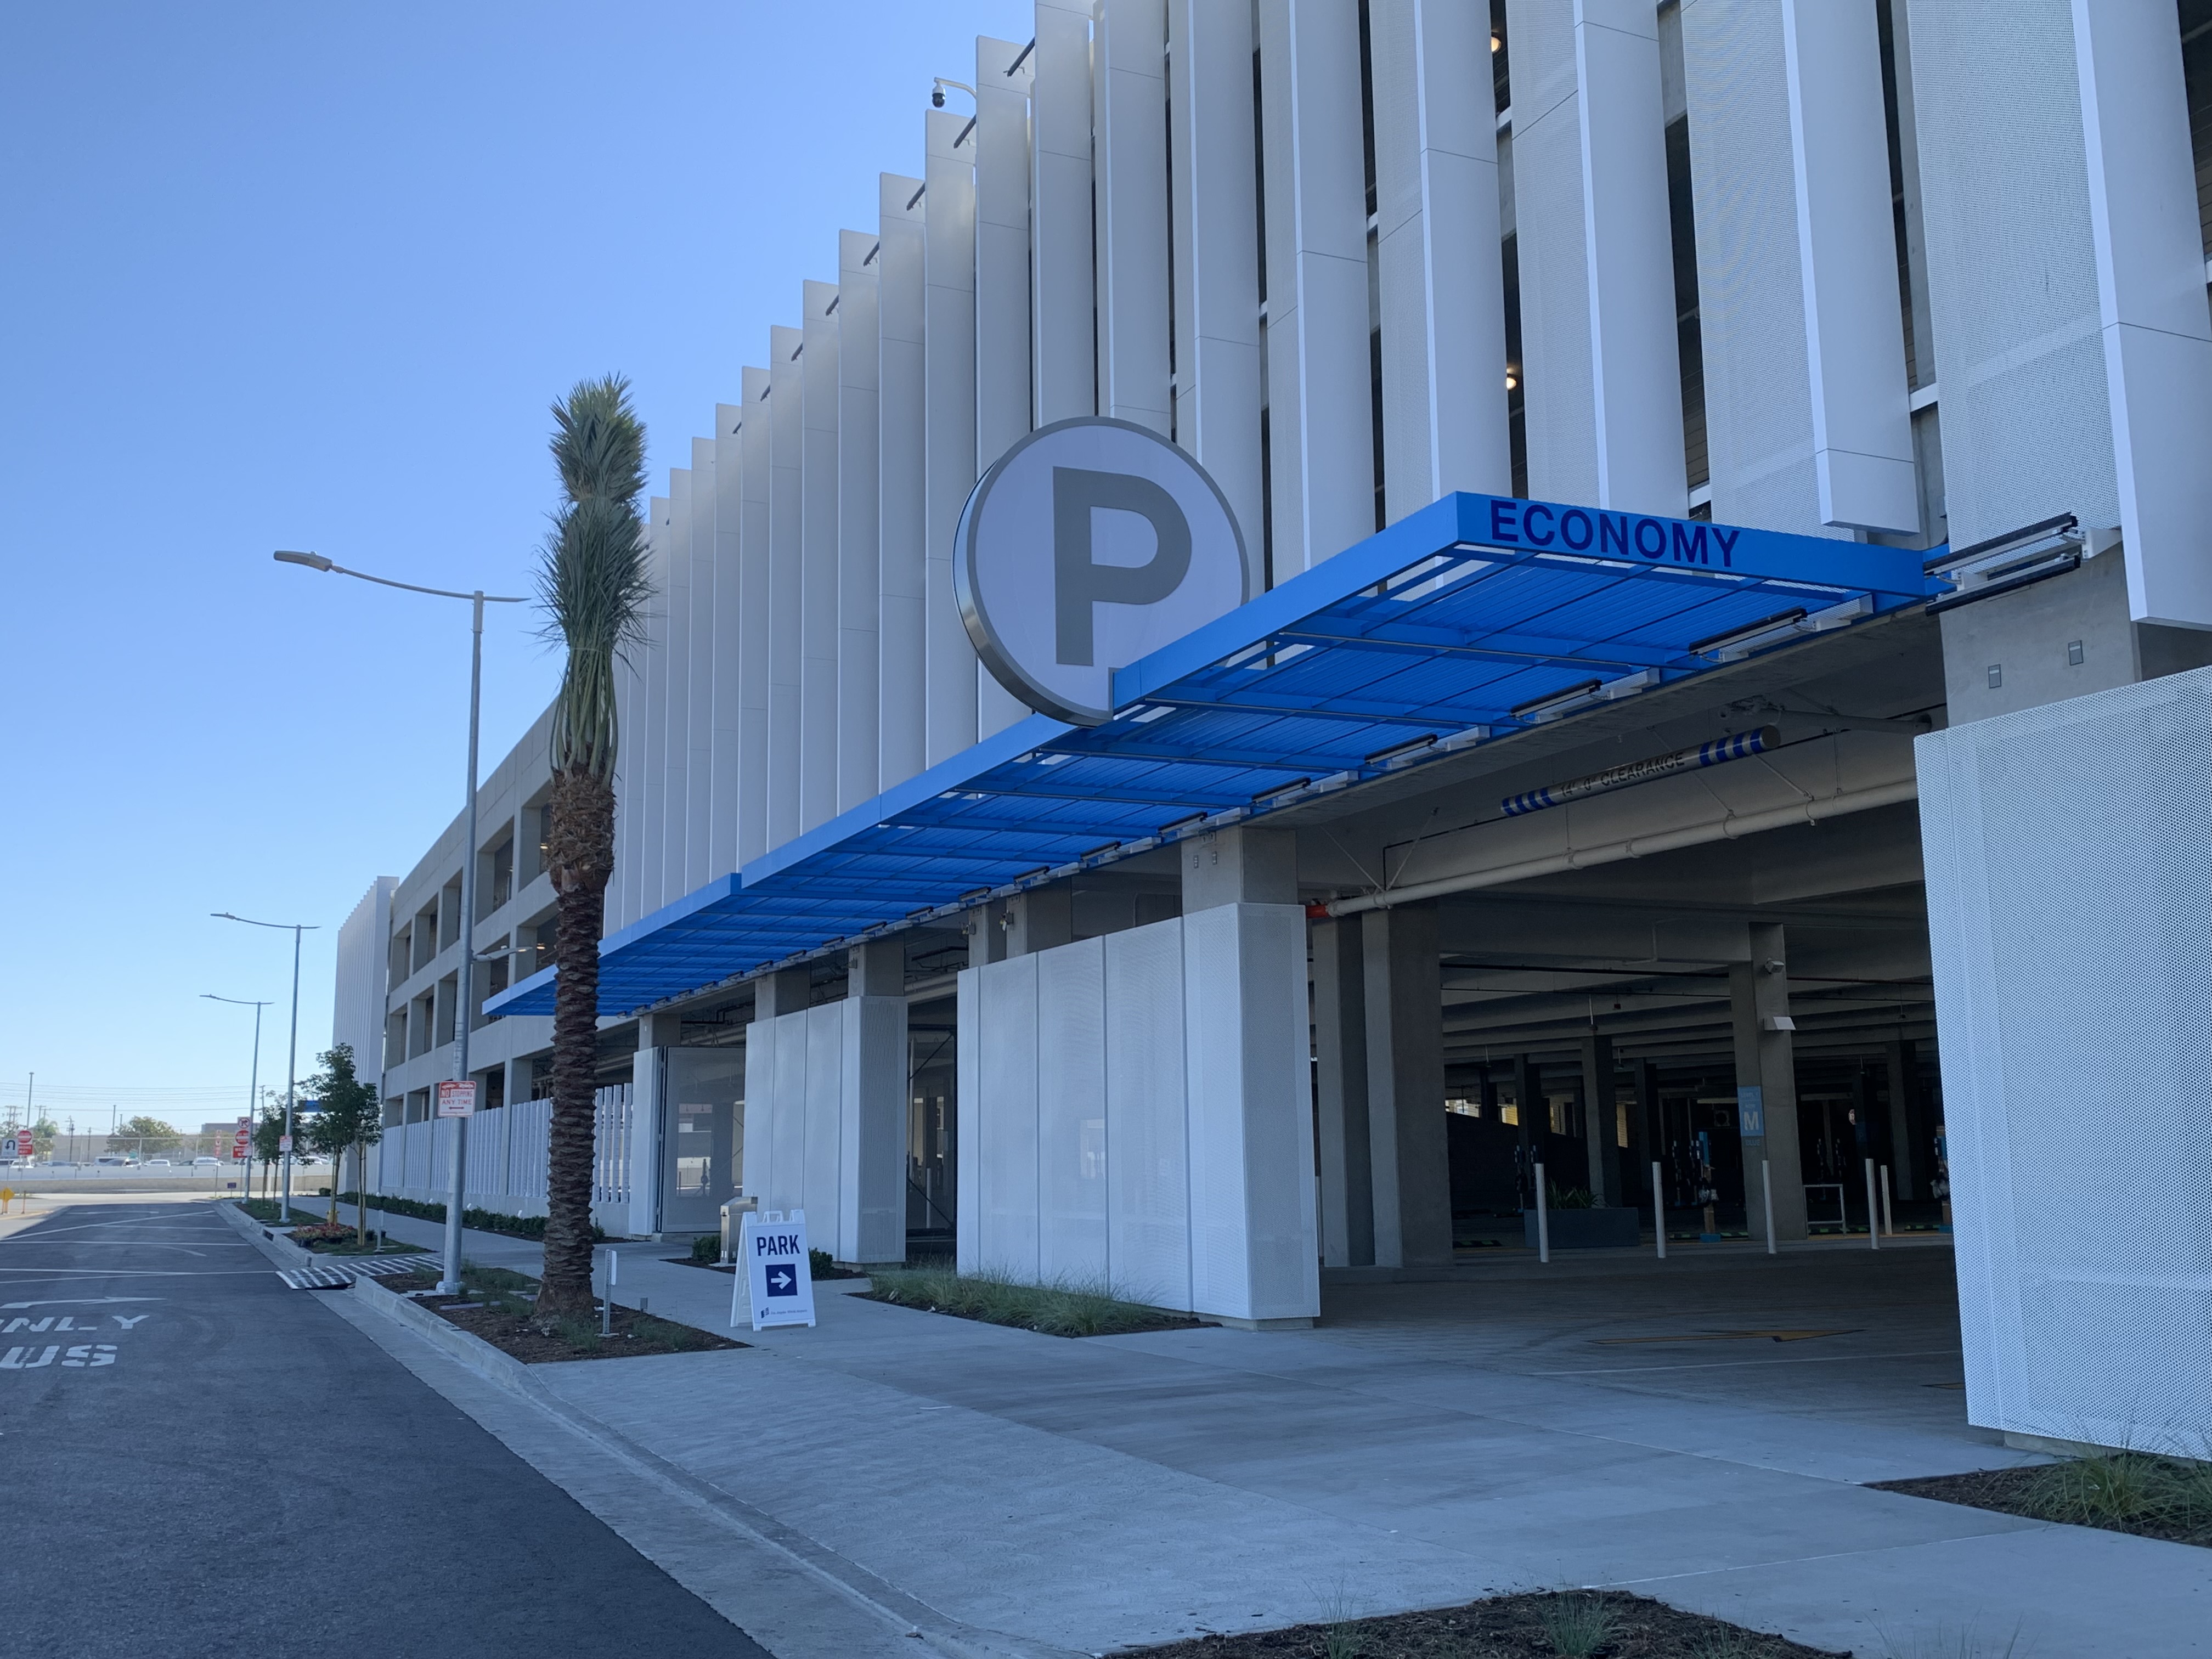 LAX Economy Parking opened to the public Oct. 19.